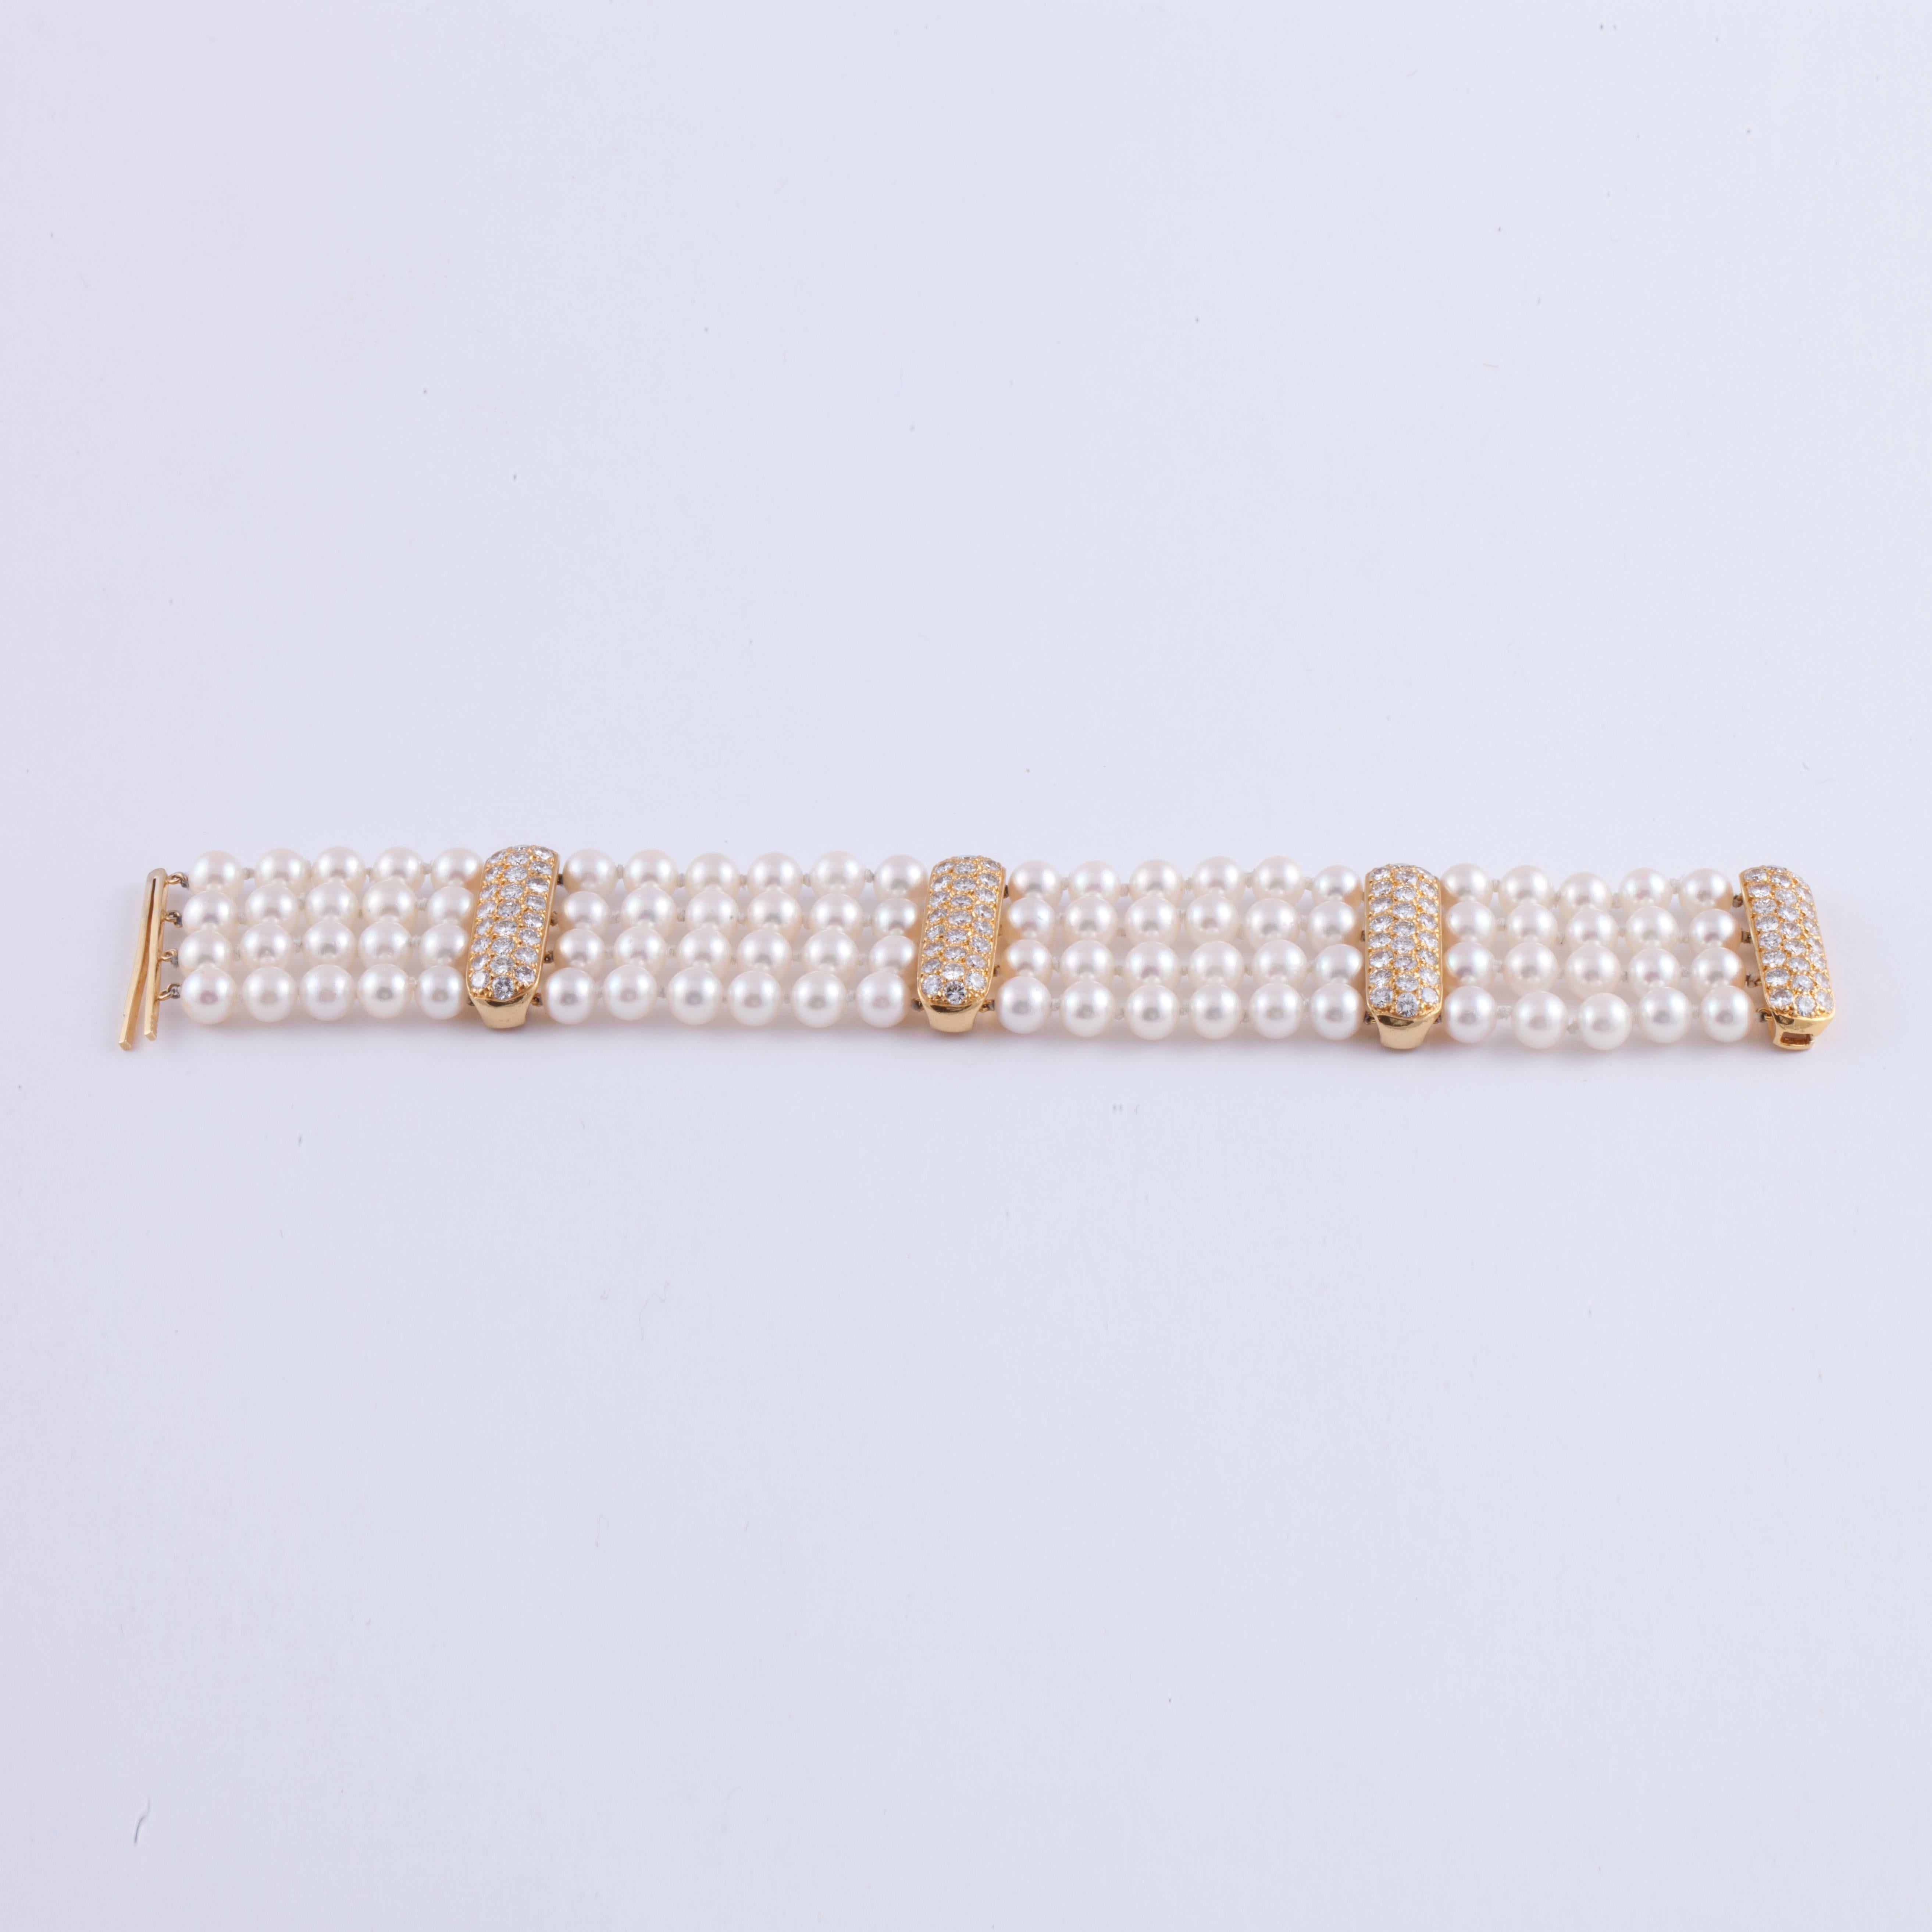 Four strand pearl bracelet featuring 88 cultured pearls that measure 6-6.5mm.  The 18K yellow gold spacers contain 7.35 carats of diamonds, G-I color and VVS clarity.  The bracelet measures 7 1/4 inches long and 1 1/16 inches wide.  Closure slides